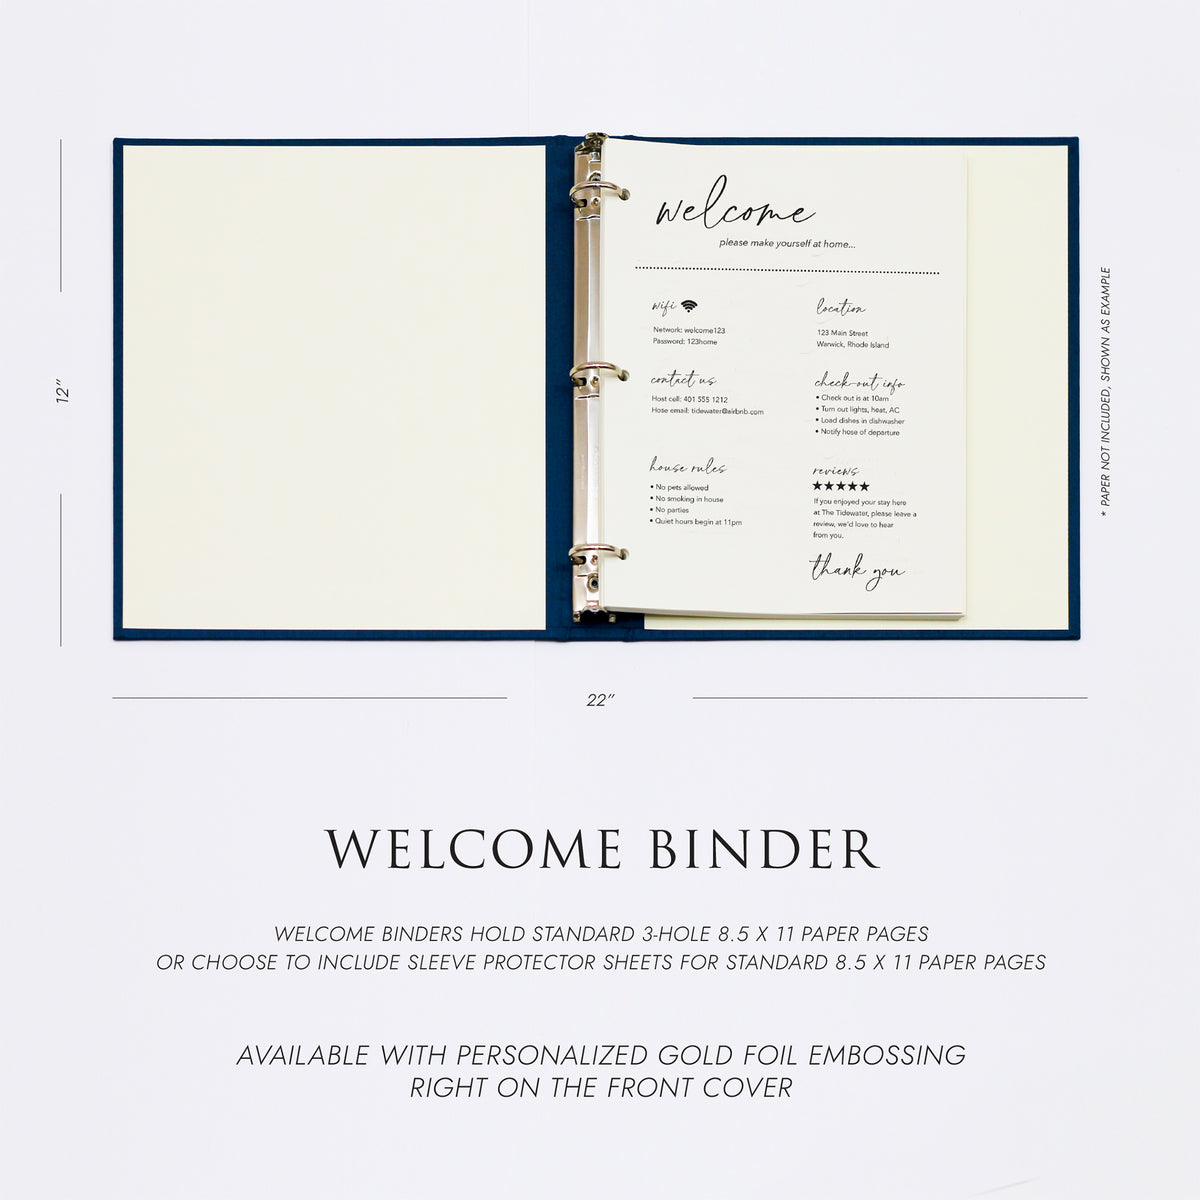 Welcome Binder with Terra Cotta Vegan Leather | Home | Air BNB